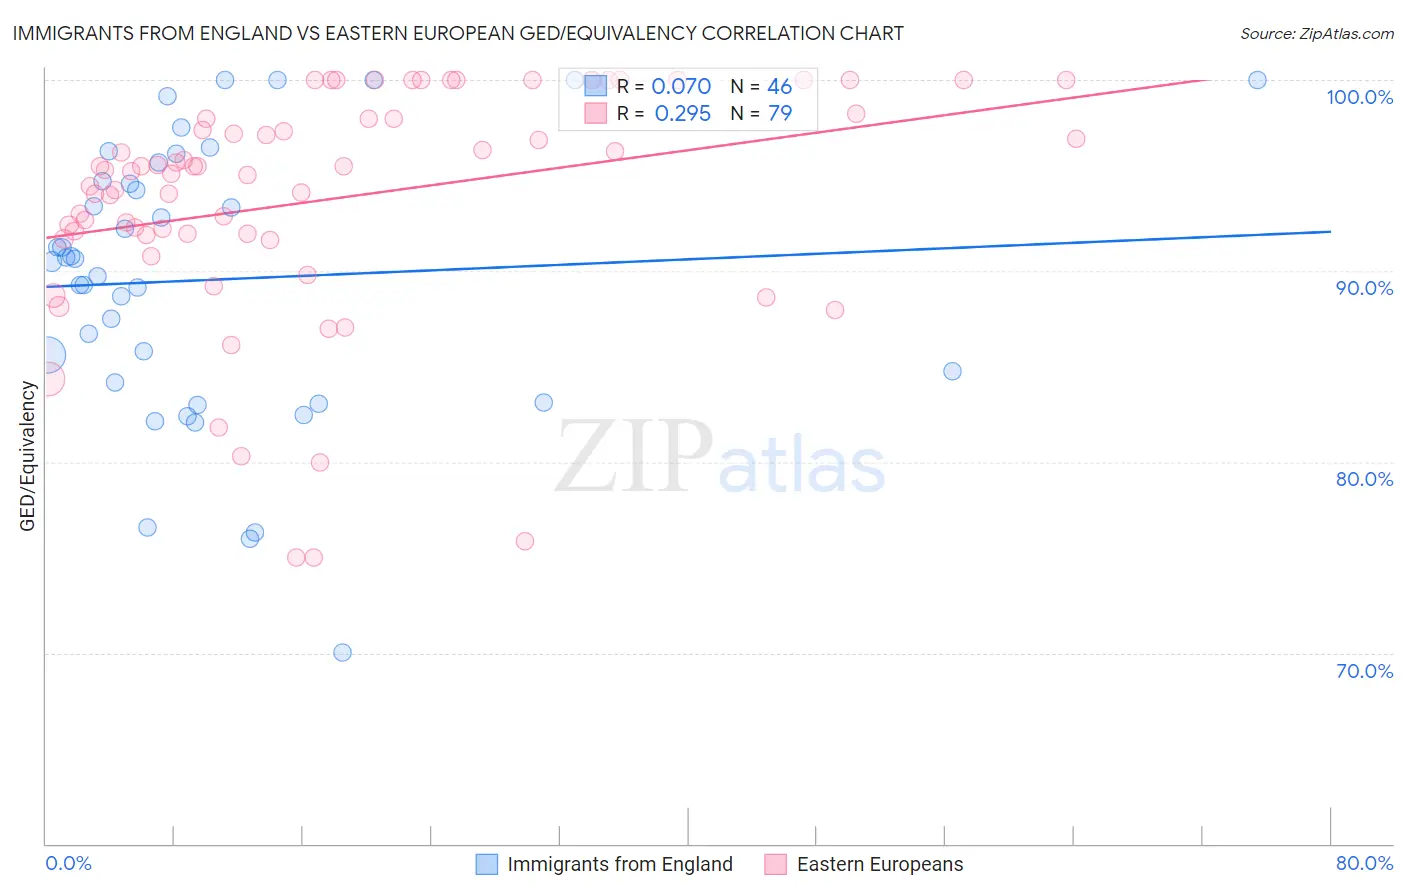 Immigrants from England vs Eastern European GED/Equivalency